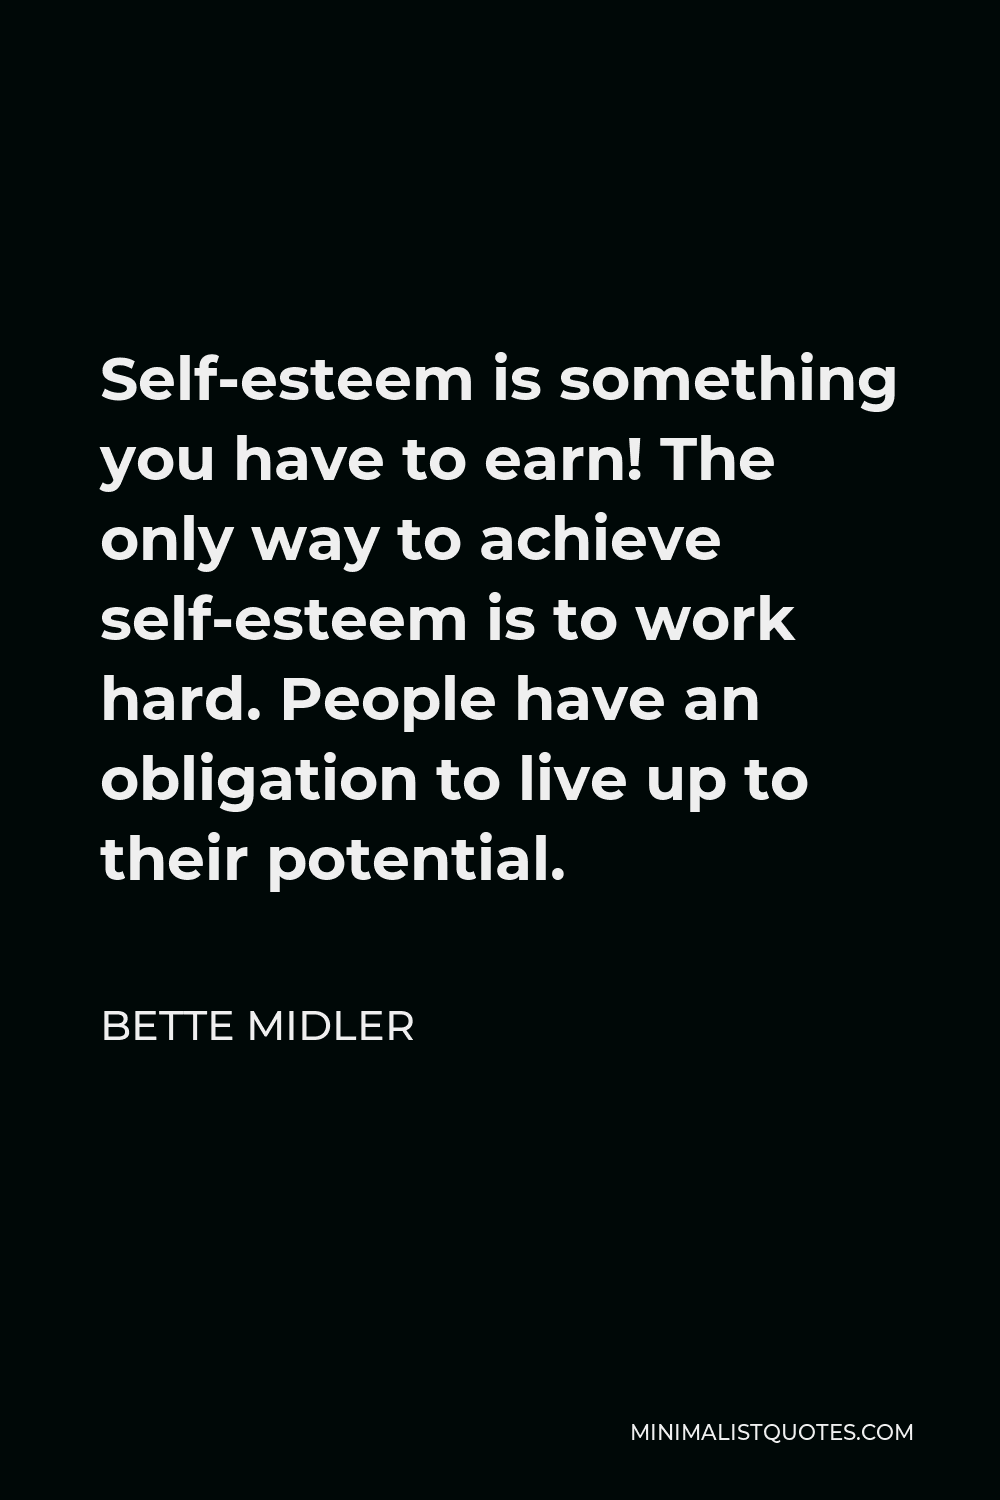 Bette Midler Quote - Self-esteem is something you have to earn! The only way to achieve self-esteem is to work hard. People have an obligation to live up to their potential.